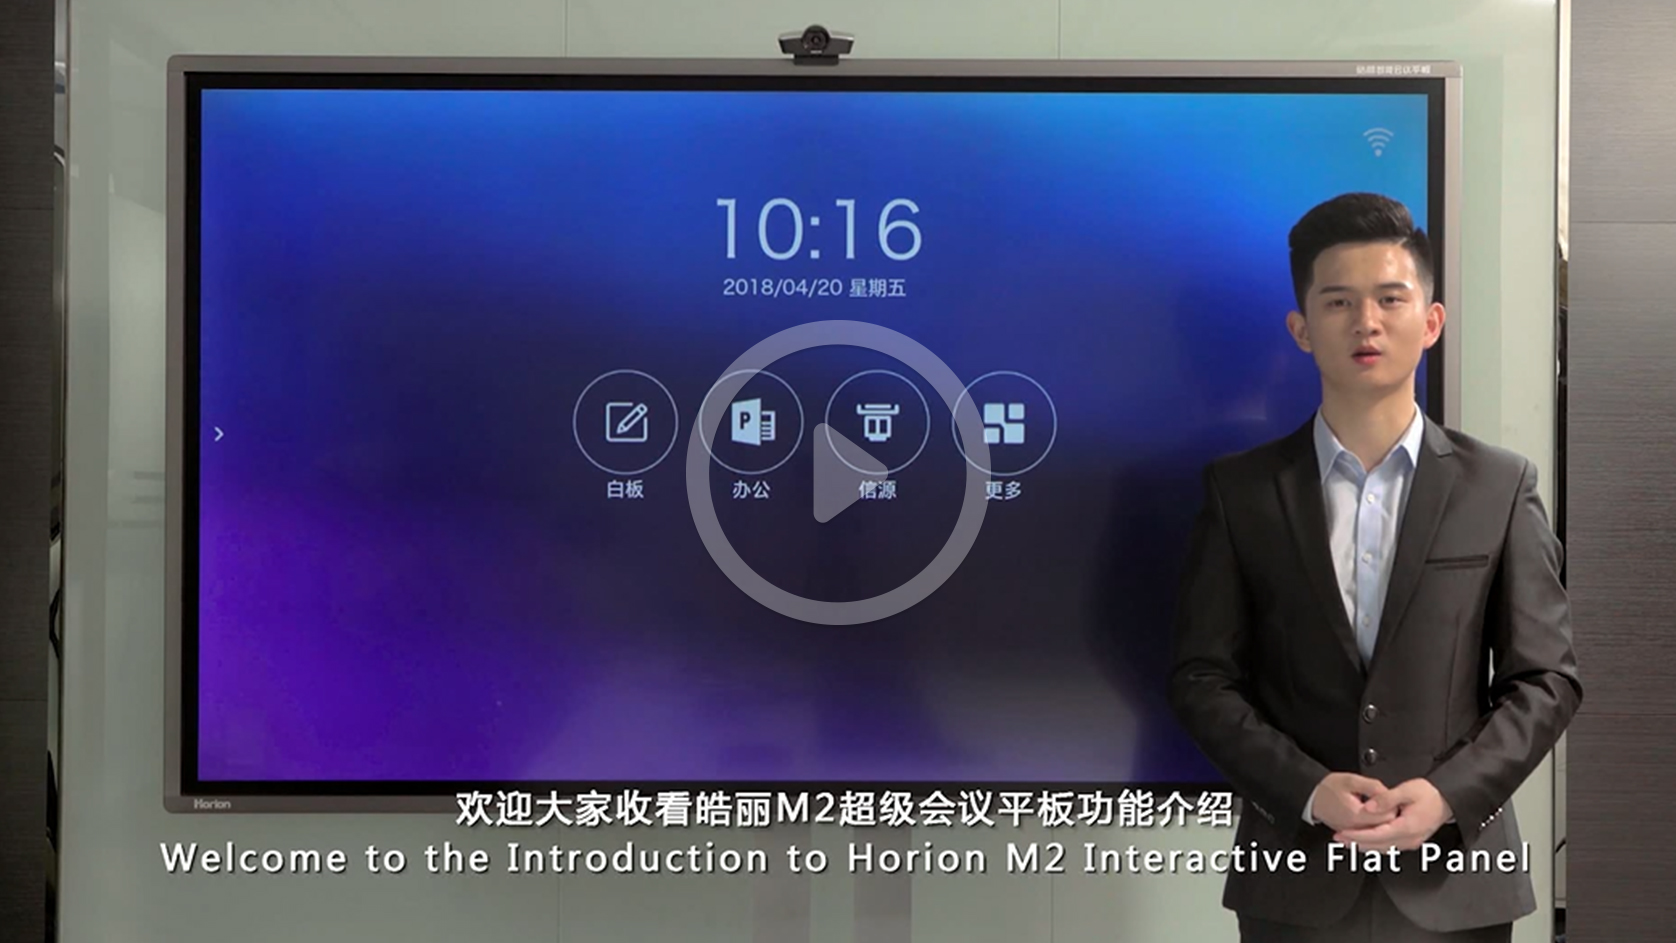 <b>Introduction Video</b><br />
Introduction Video of Horion M2